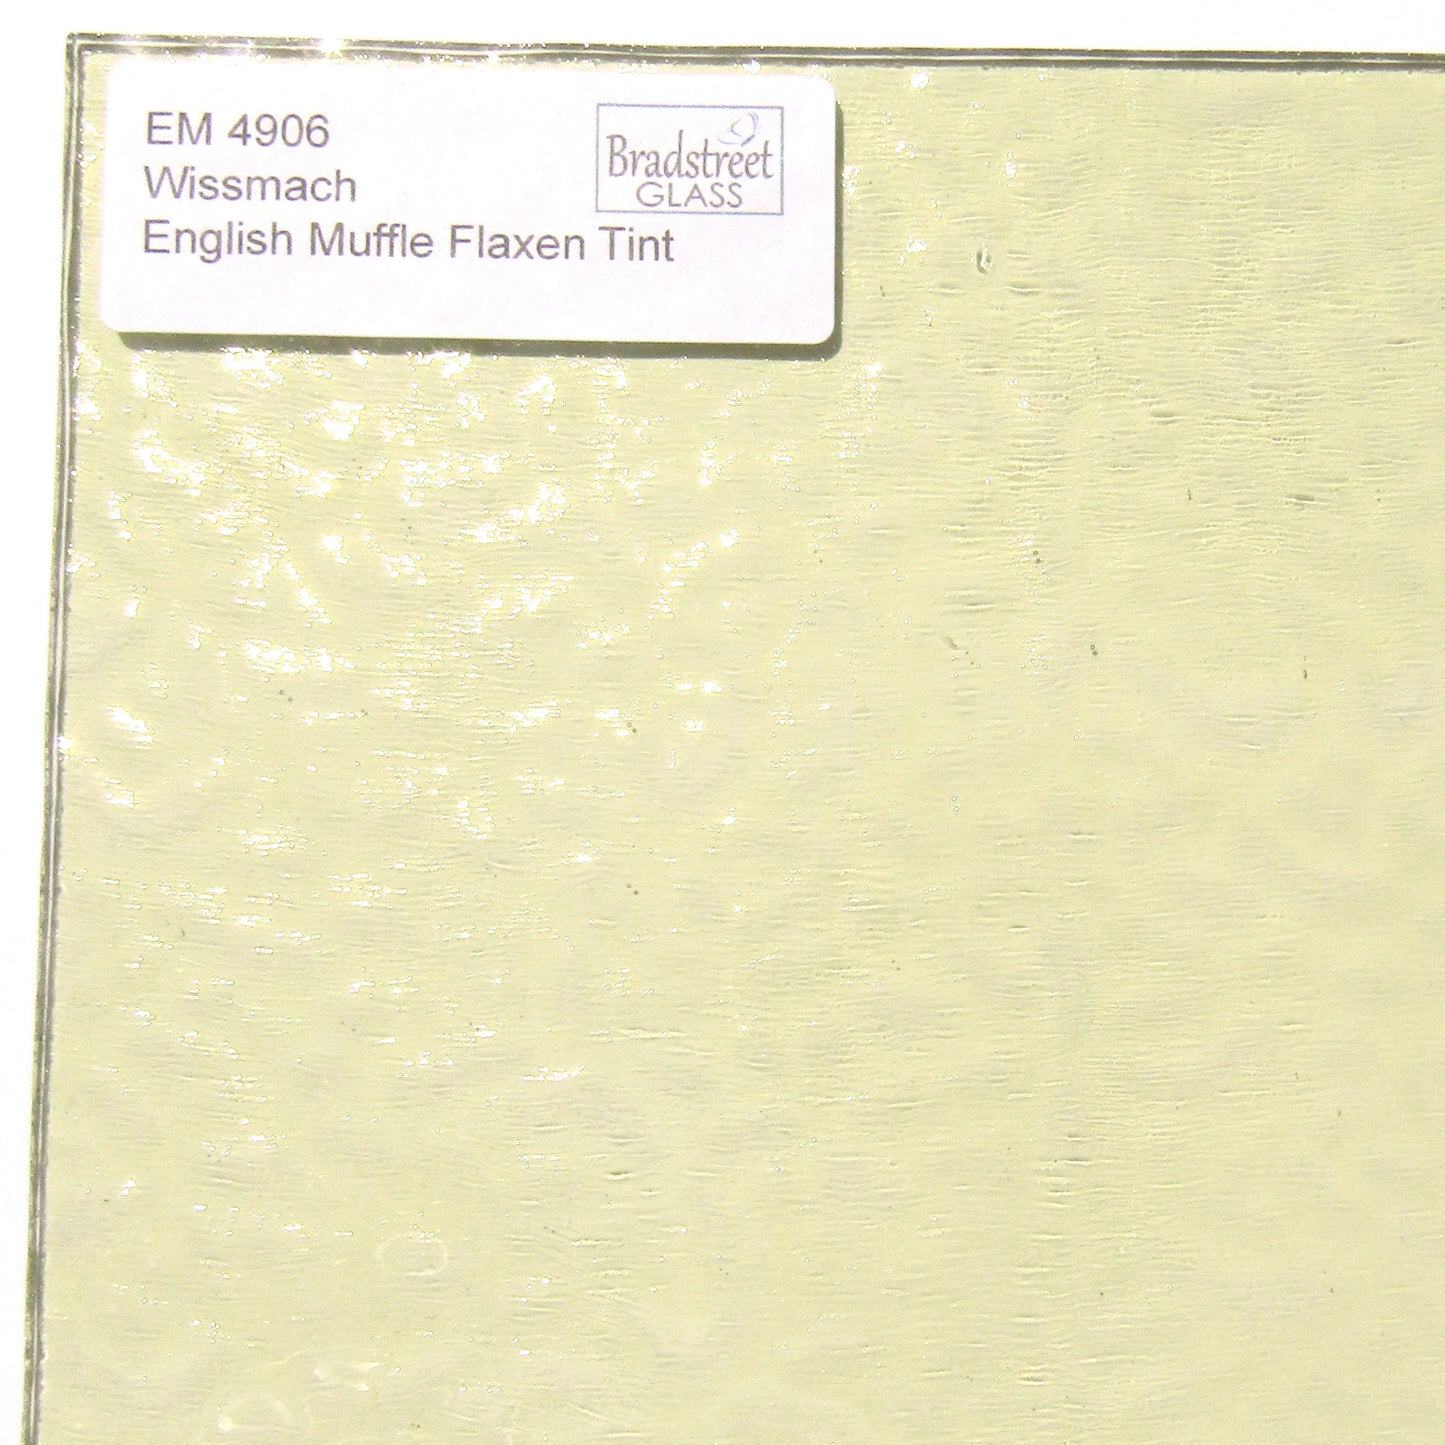 Wissmach English Muffle Flaxen Tint Cathedral Stained Glass Sheet EM4906